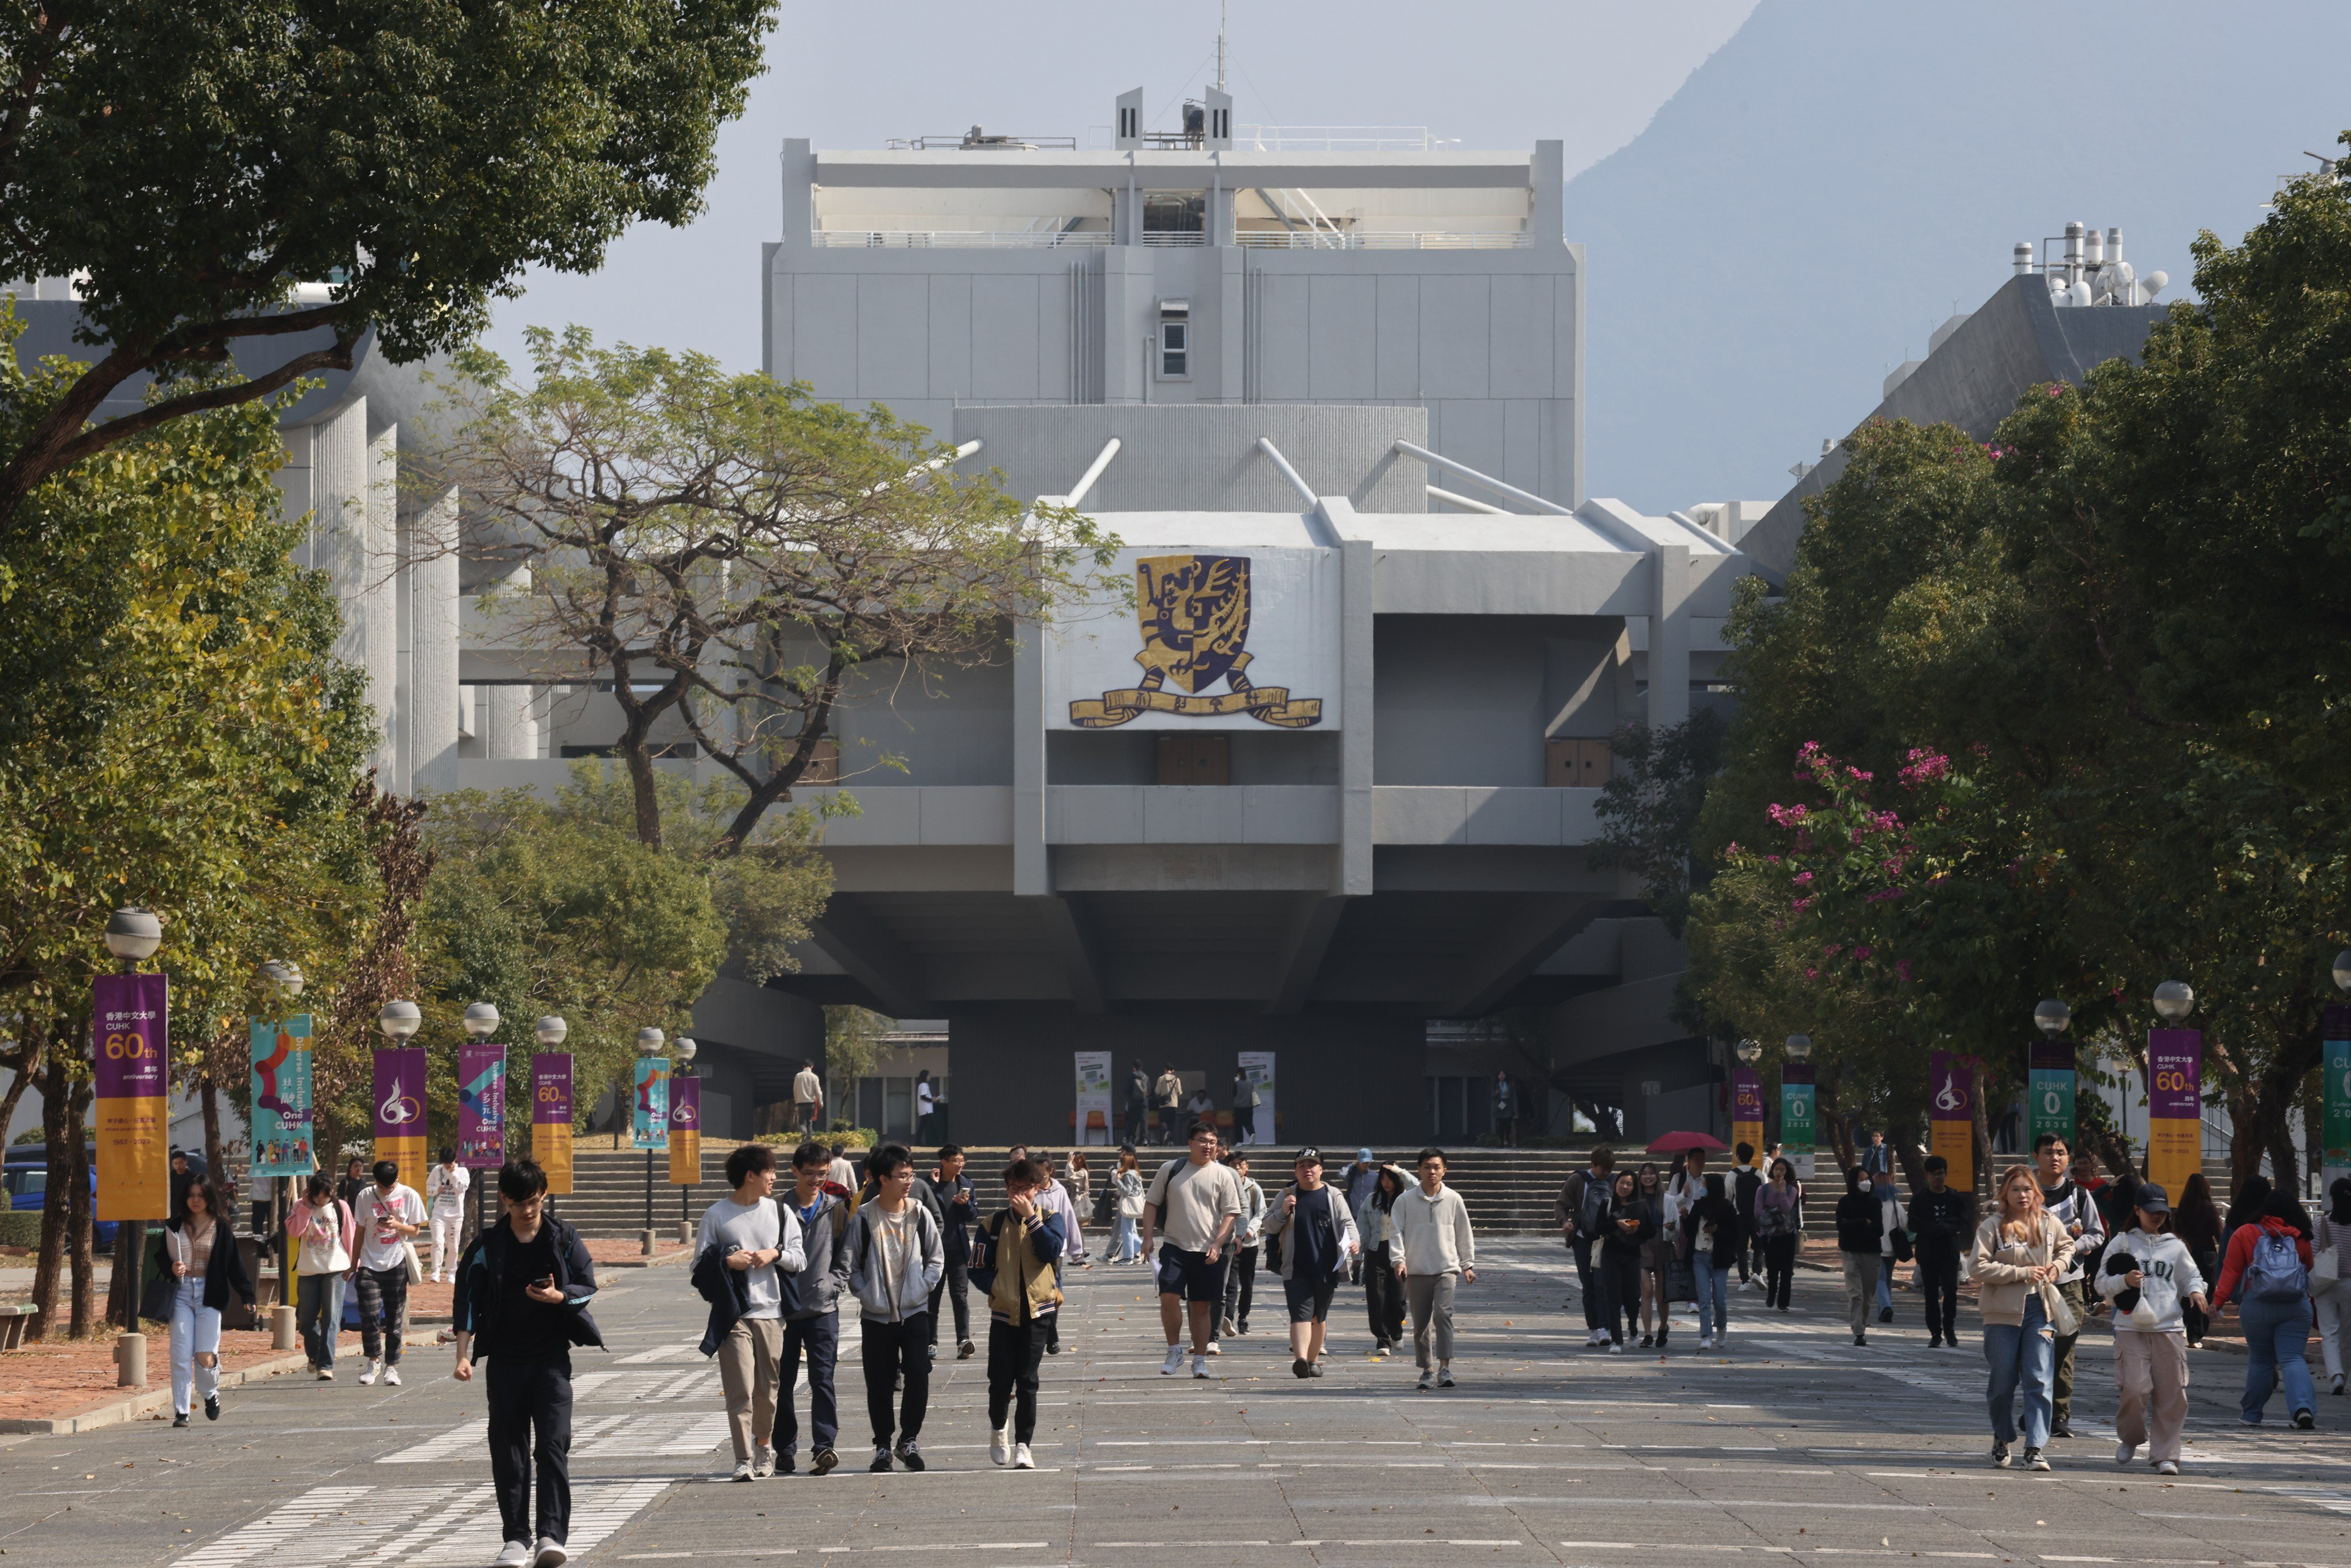 The scholarship will be offered to first year students at the University of Hong Kong, Chinese University (pictured), Hong Kong University of Science and Technology and Polytechnic University. Photo: Yik Yeung-man